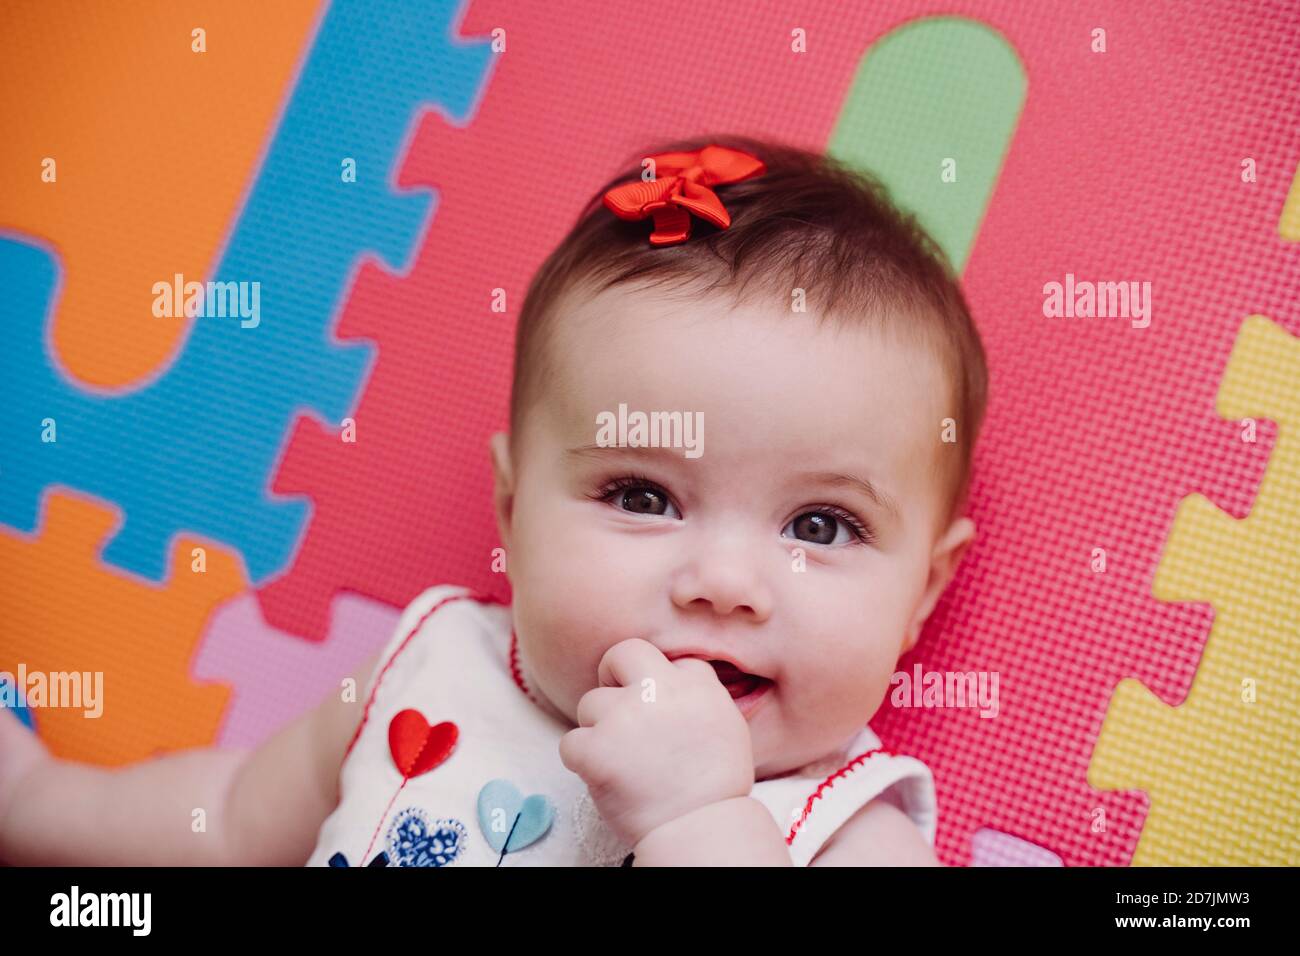 Close Up Portrait Of Cute Baby Girl With Finger In Mouth Lying On Puzzle Playmat At Home Stock Photo Alamy